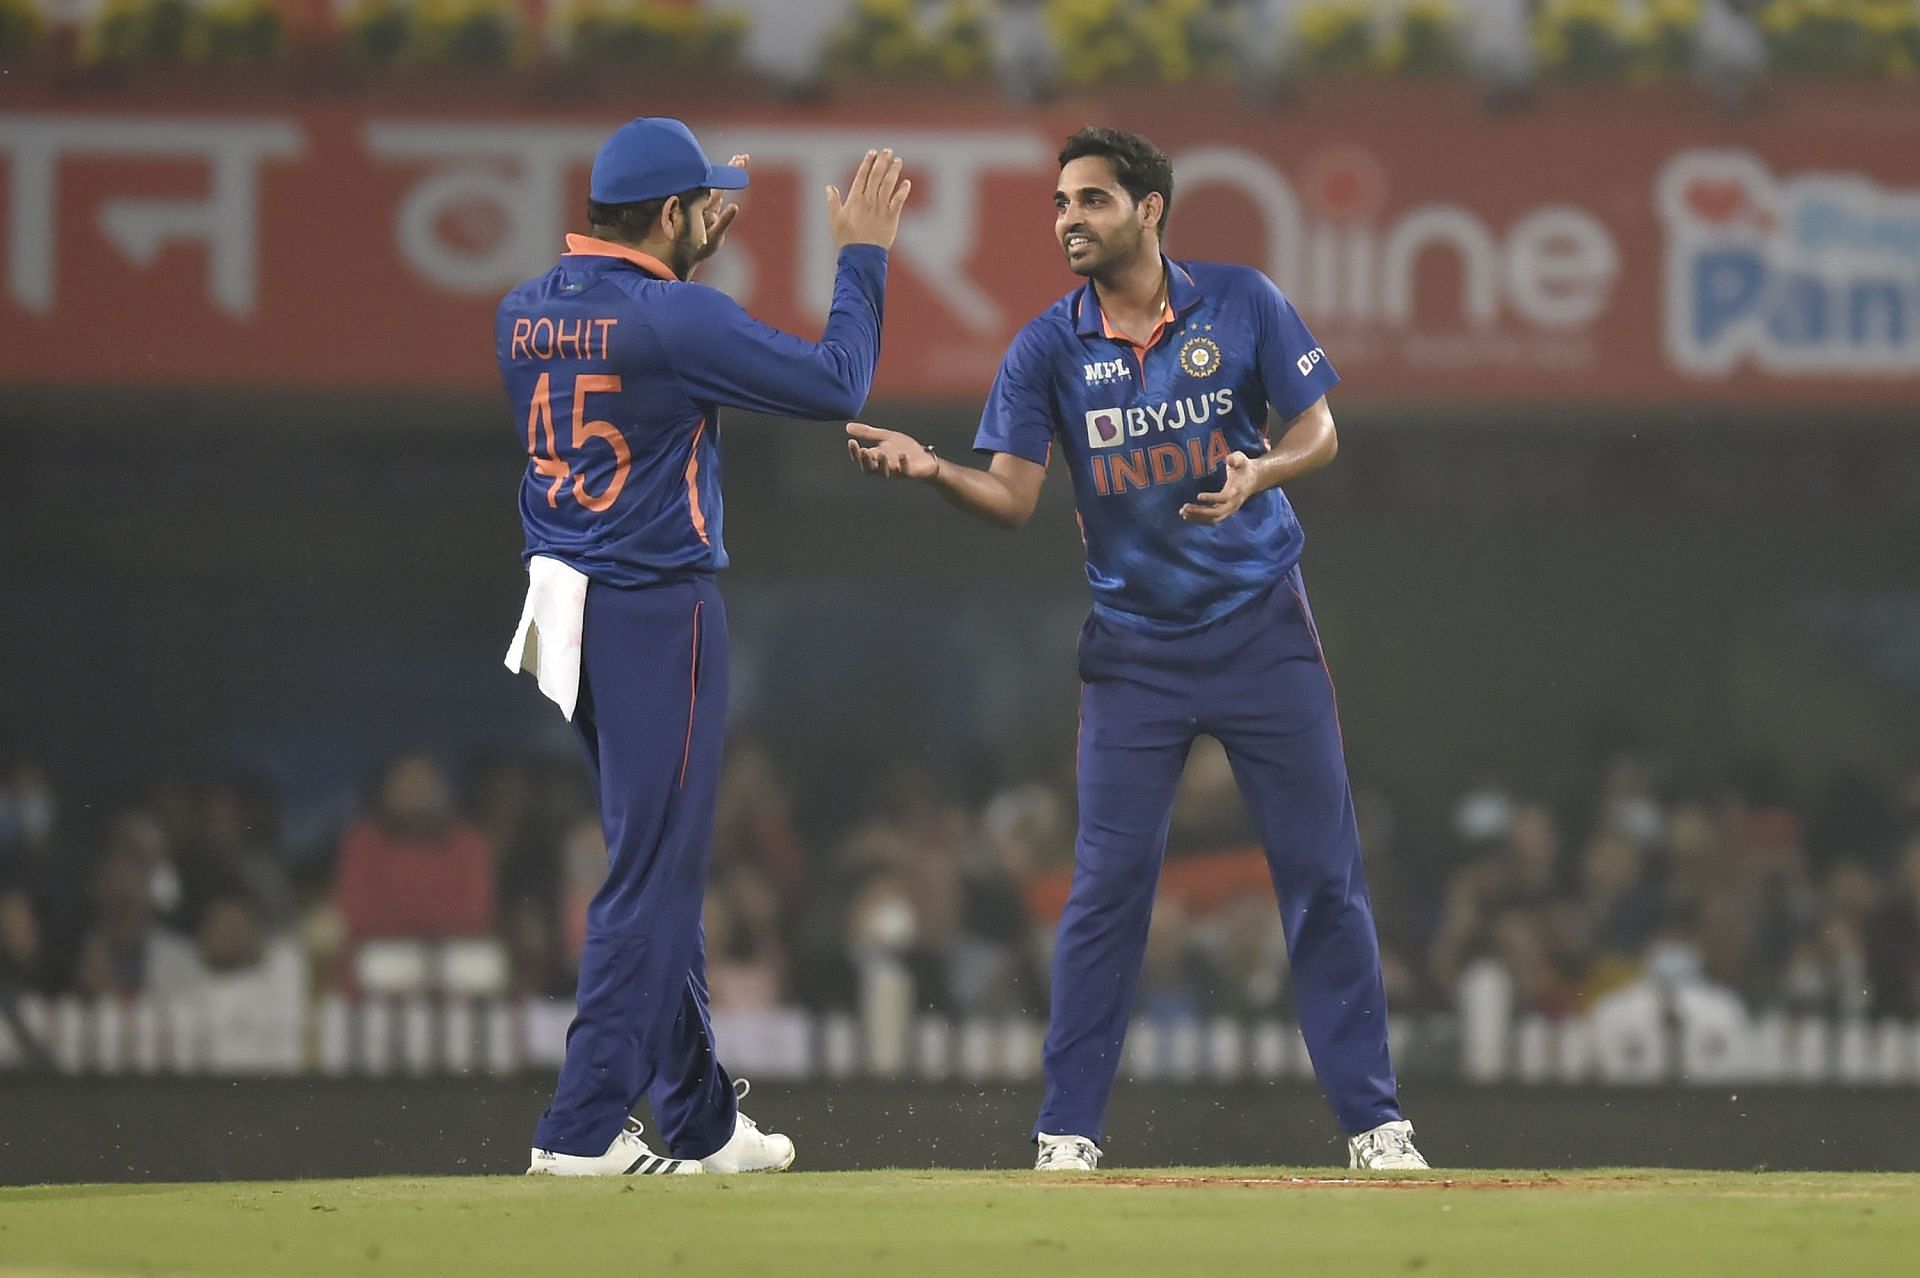 Bhuvneshwar Kumar looked in slightly better rhythm in the first T20I against the West Indies